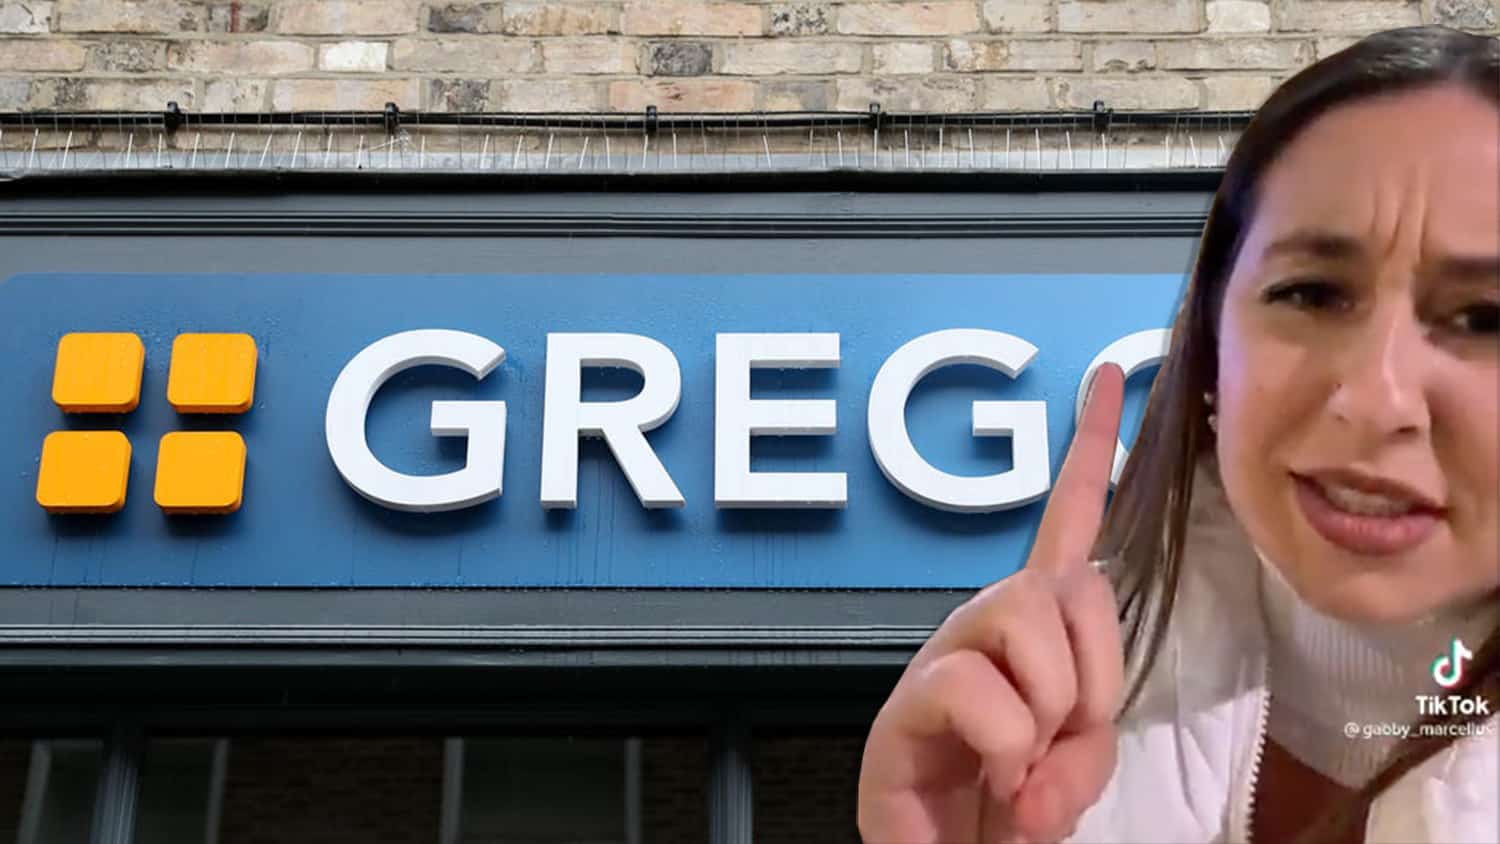 Watch: American woman waxes lyrical about her favourite breakfast spot in Britain – ‘GR Eggs’